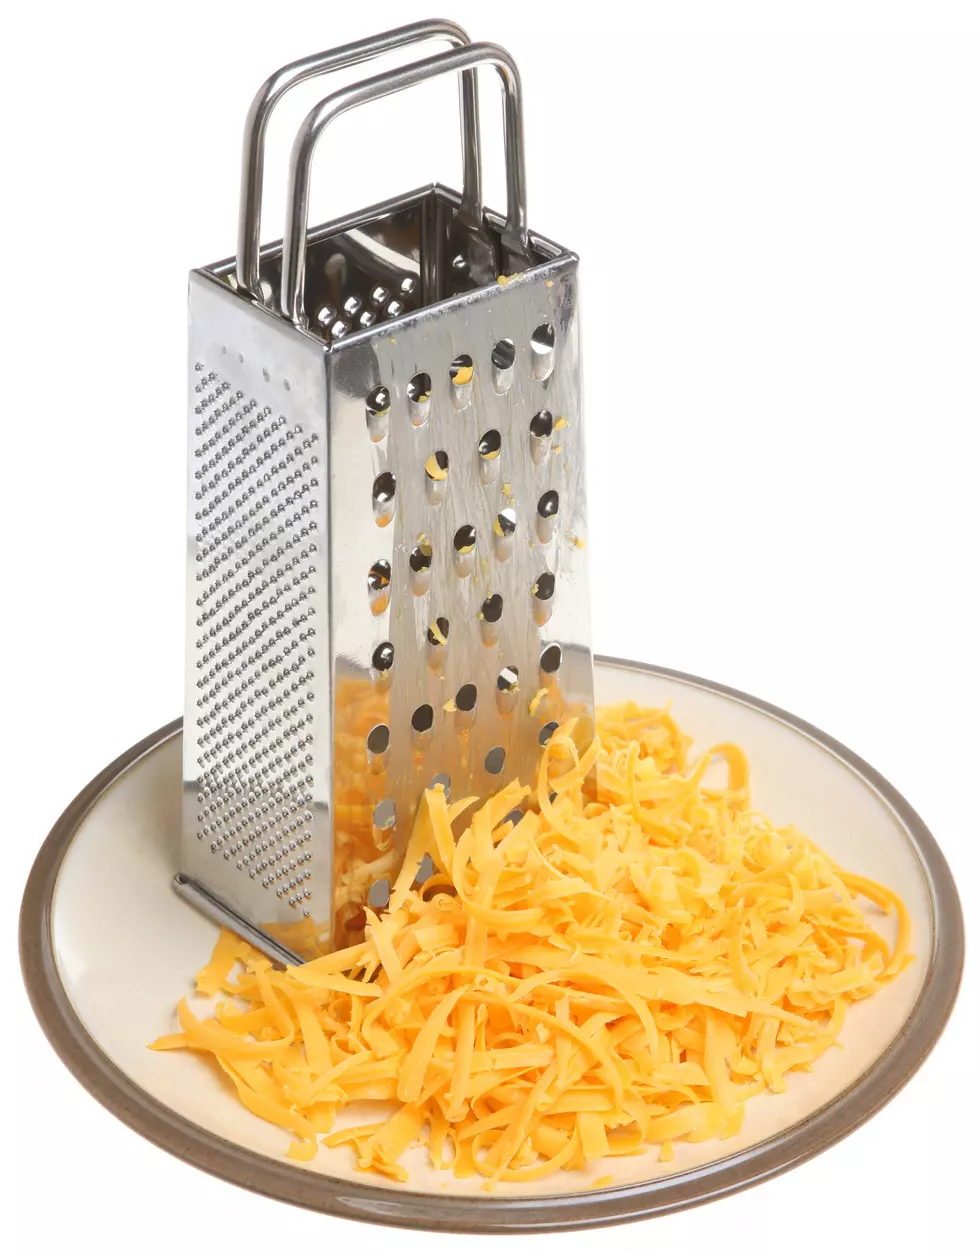 You Have Been Using A Cheese Grater WRONG Your Whole Life